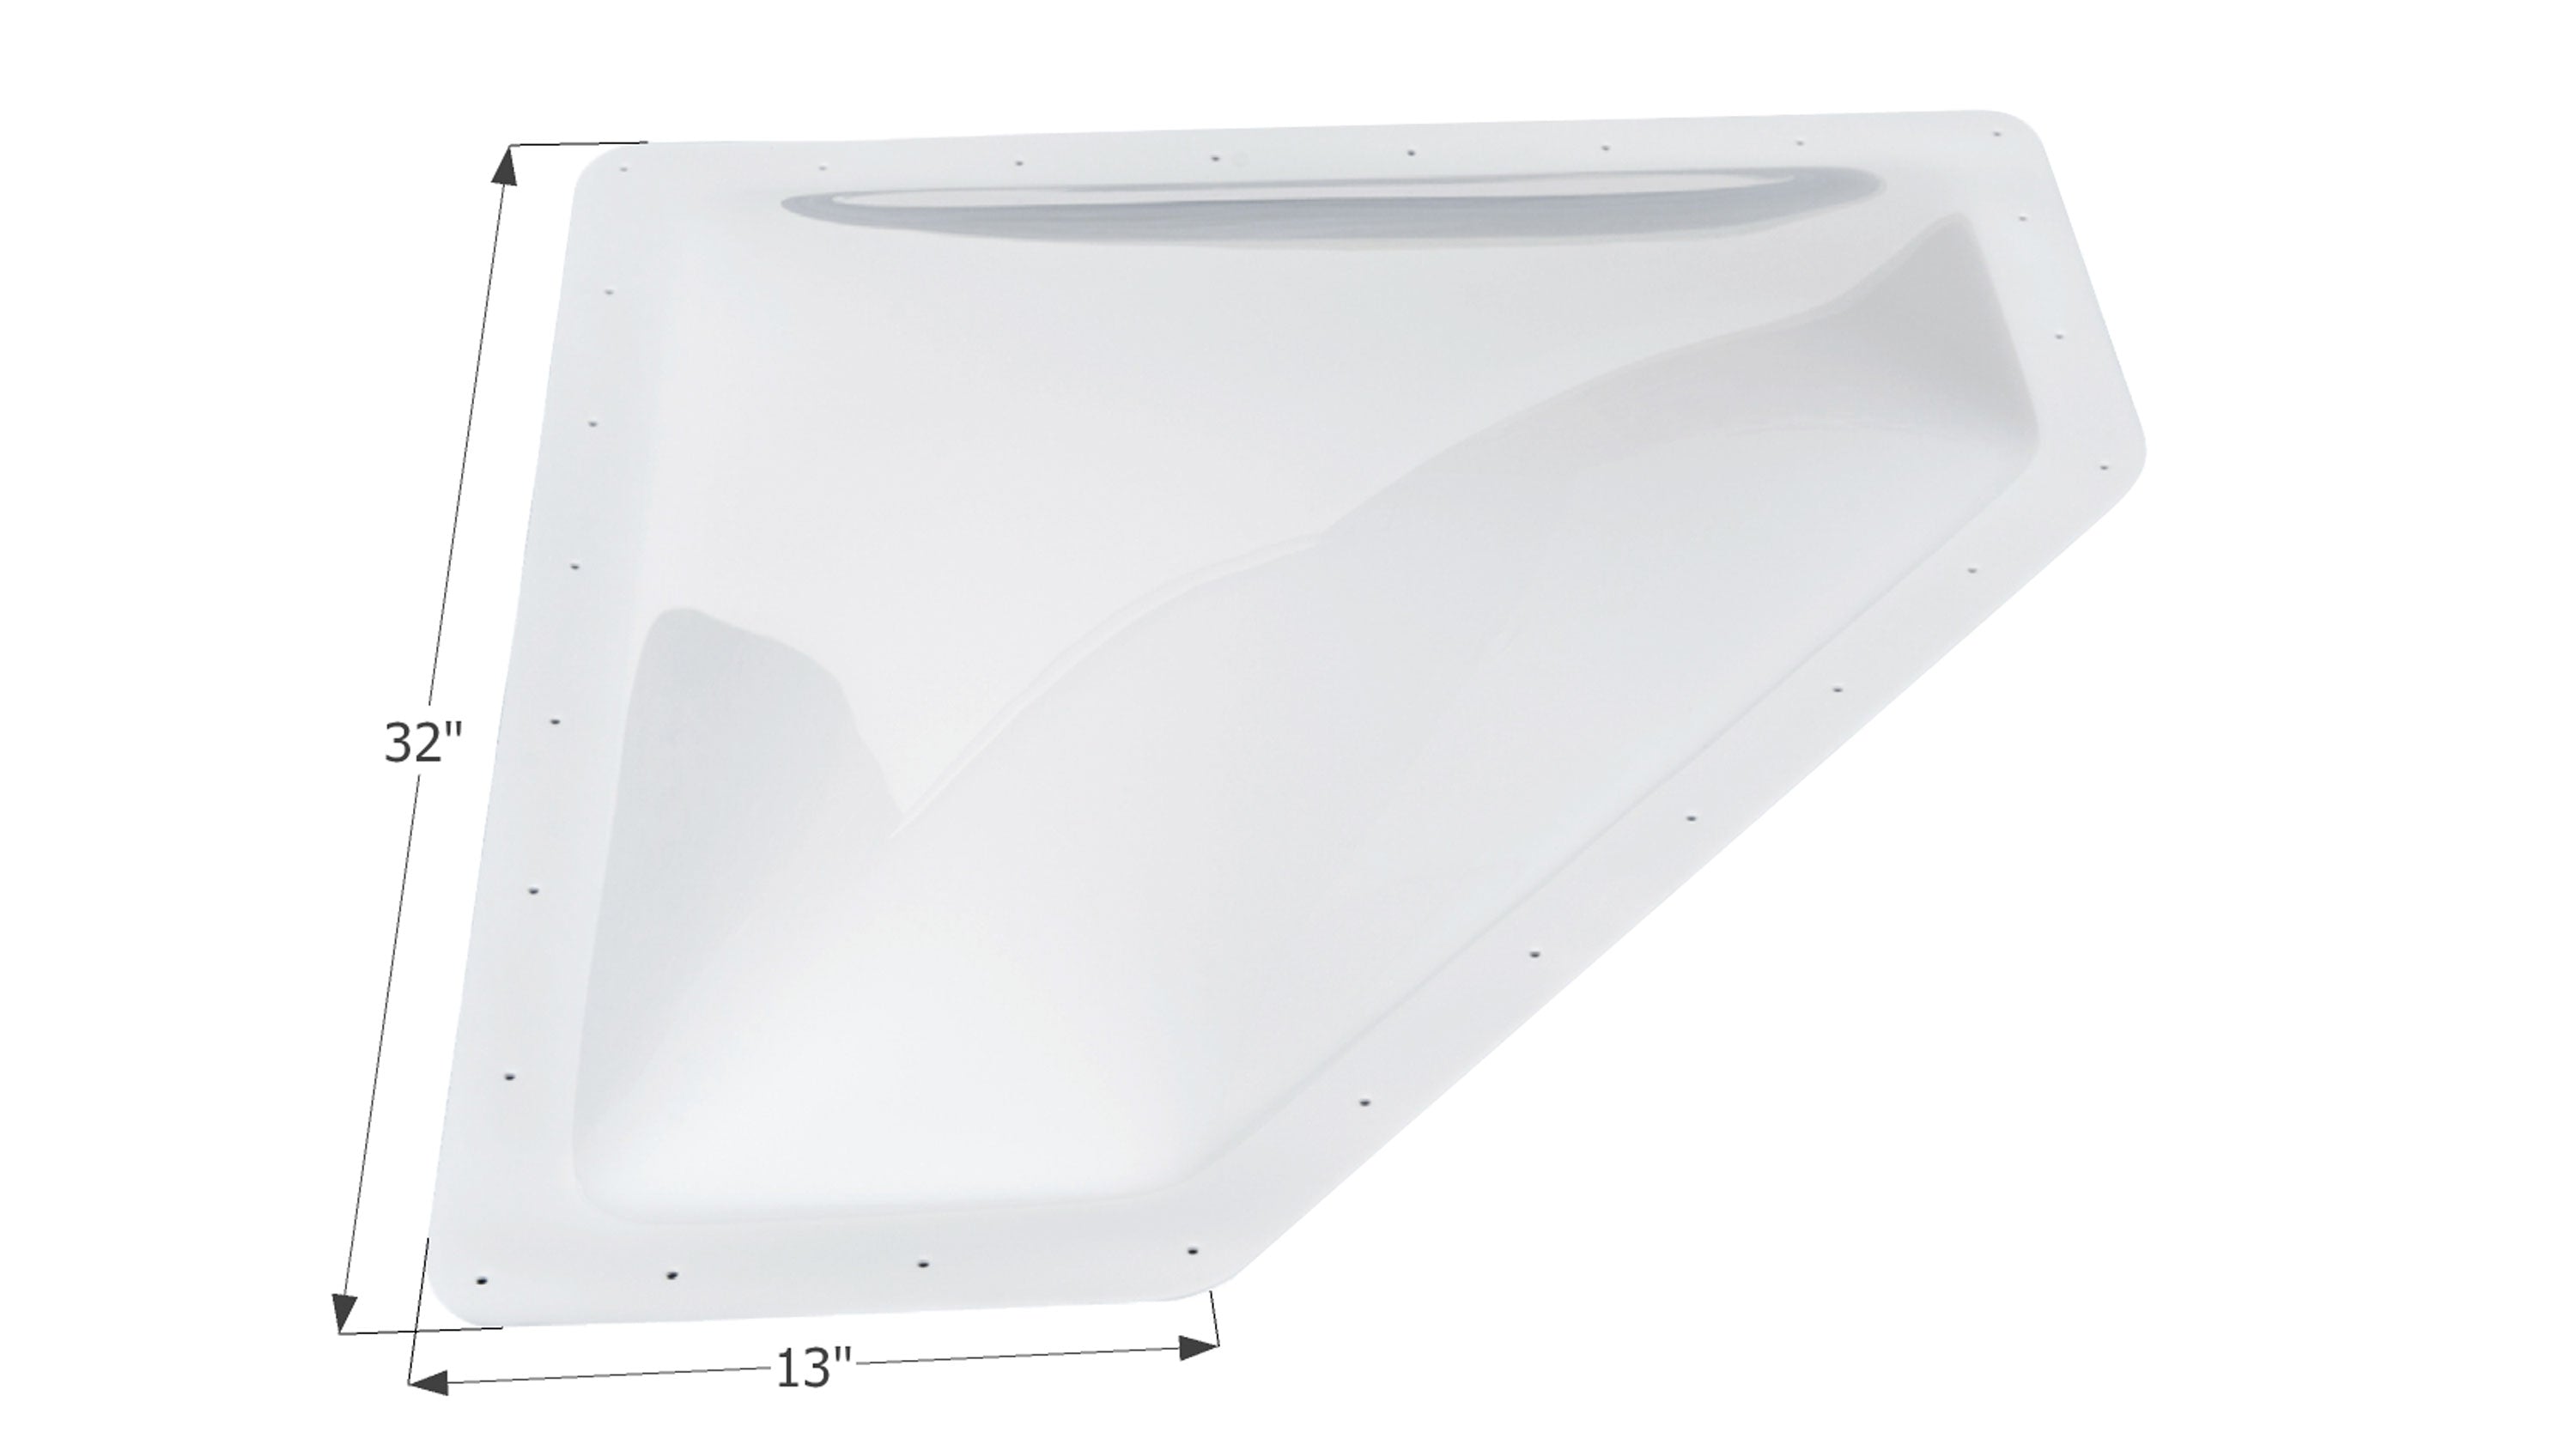 Icon 01869 RV Skylight NSL2810 - 32" x 13" with Neo Angle, White